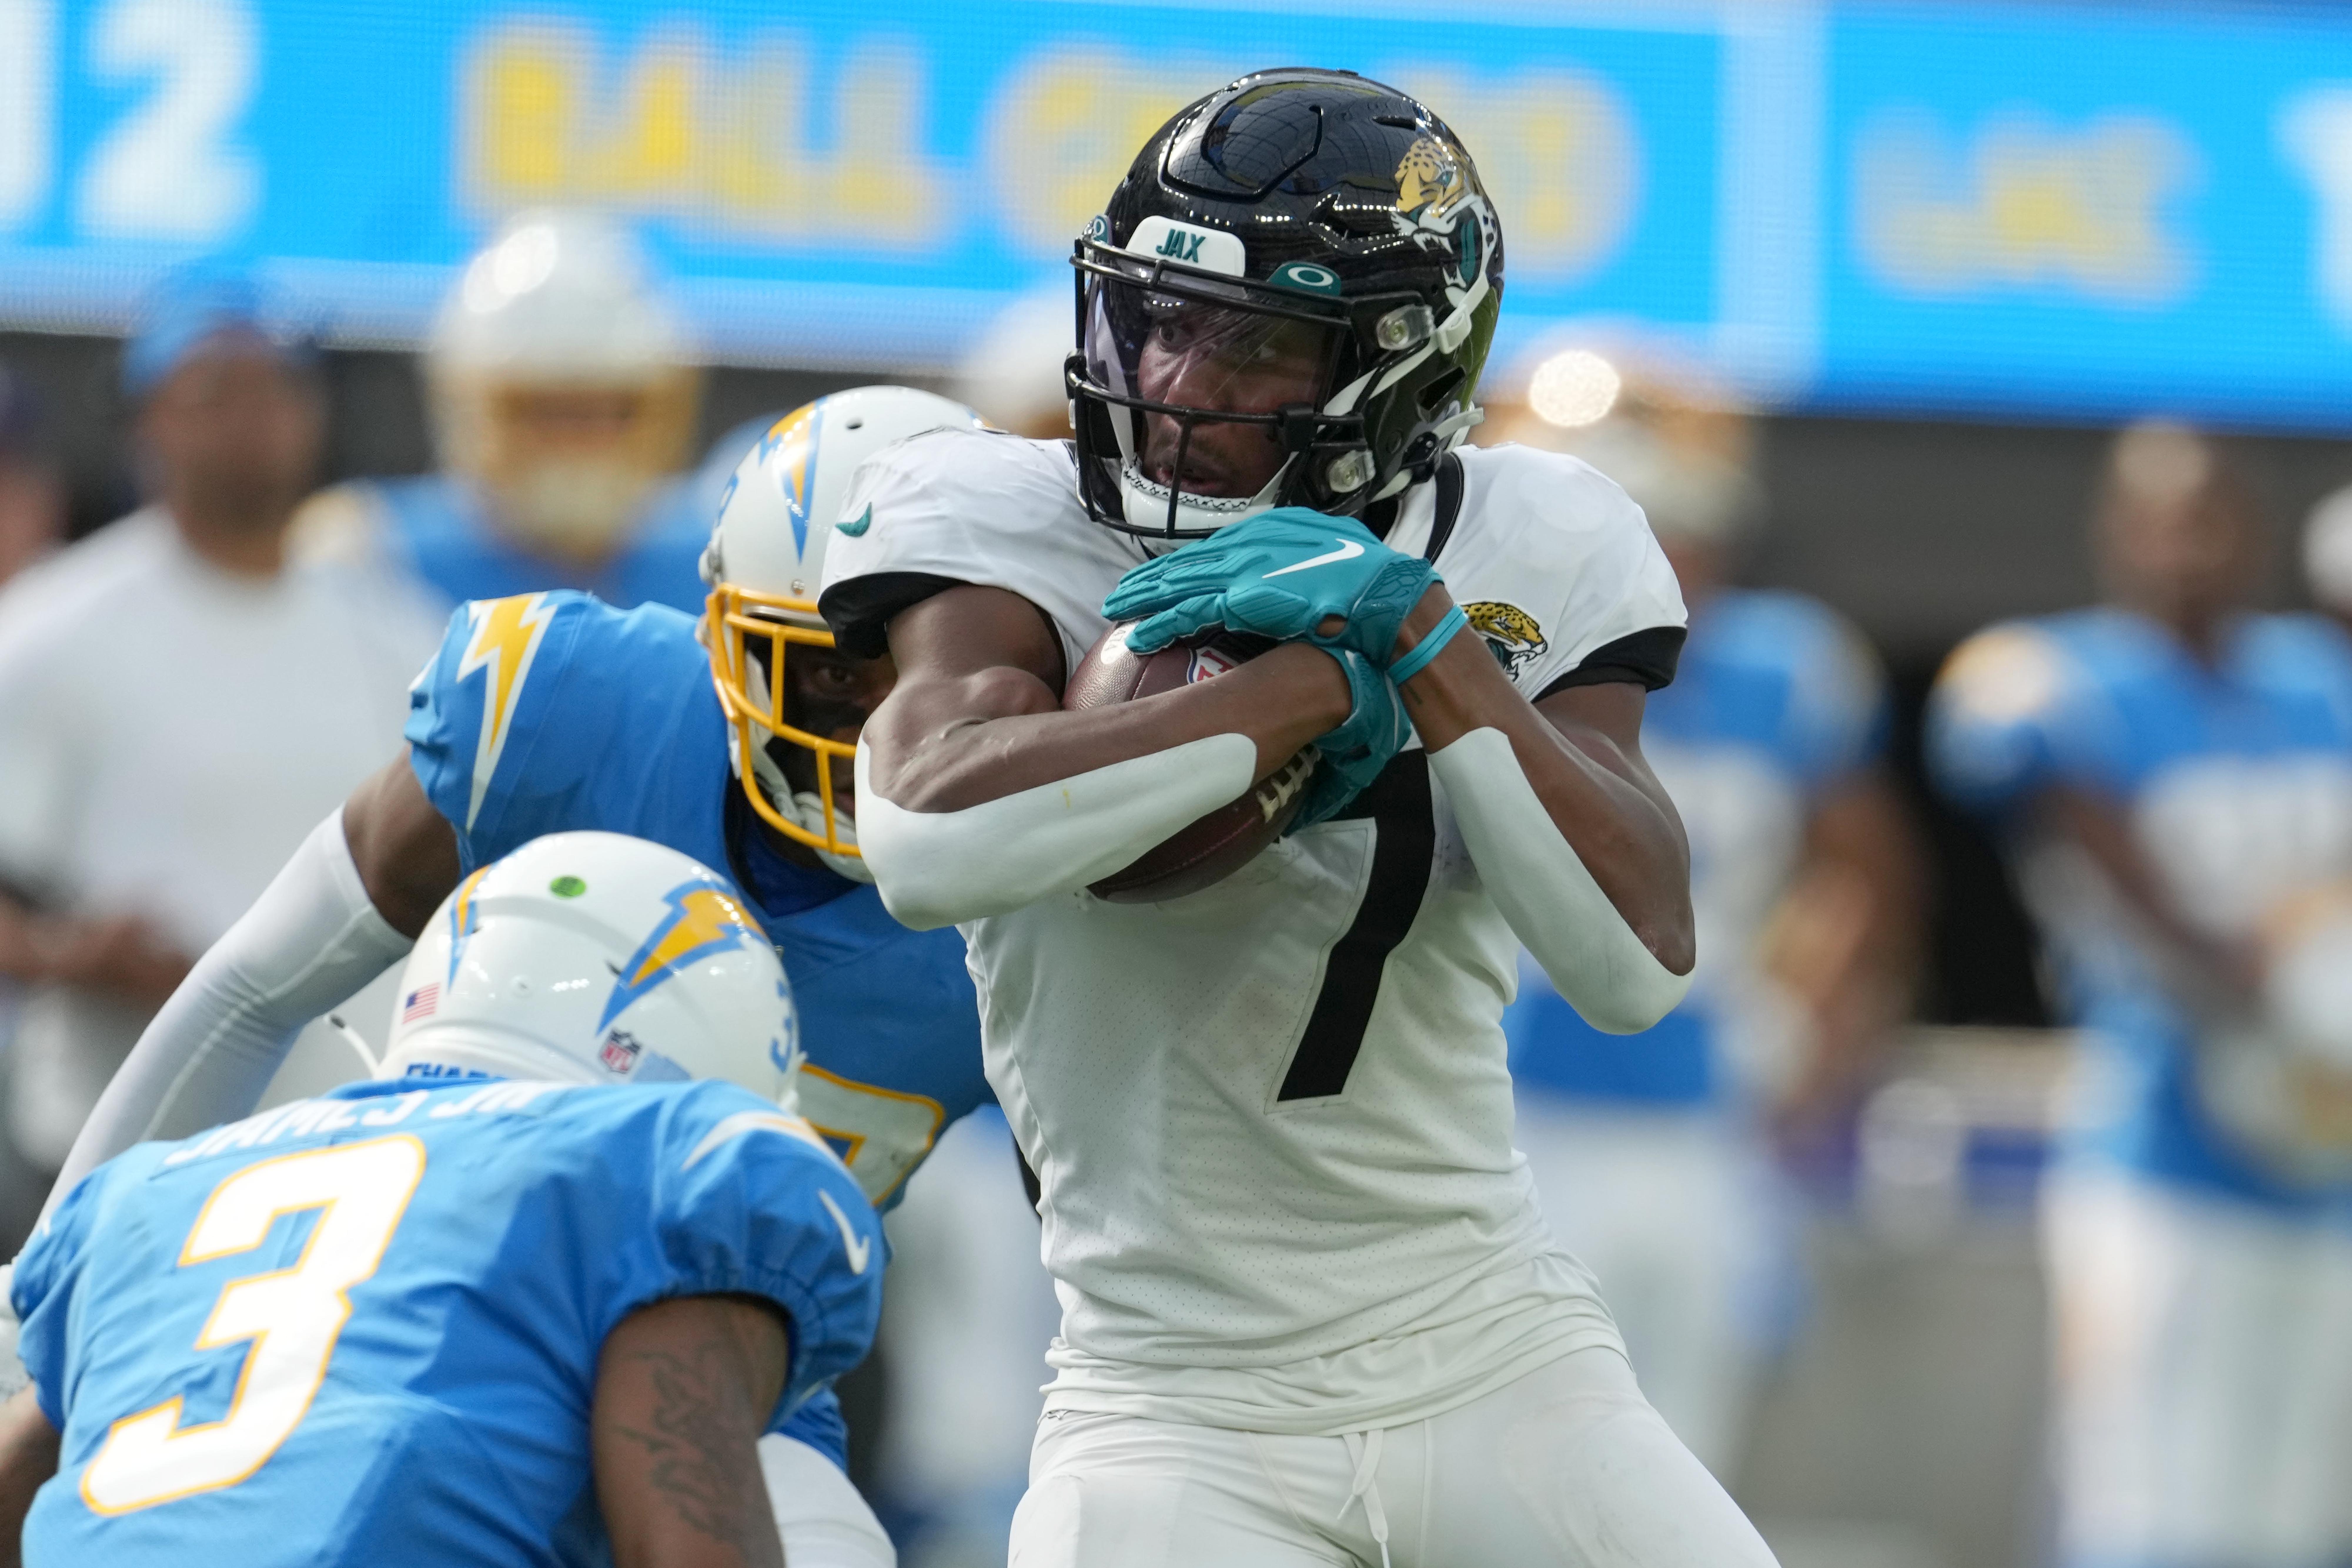 Jacksonville Jaguars wide receiver Zay Jones (7) moves the ball against Los Angeles Chargers safety Derwin James Jr. (3) in the second half at SoFi Stadium.